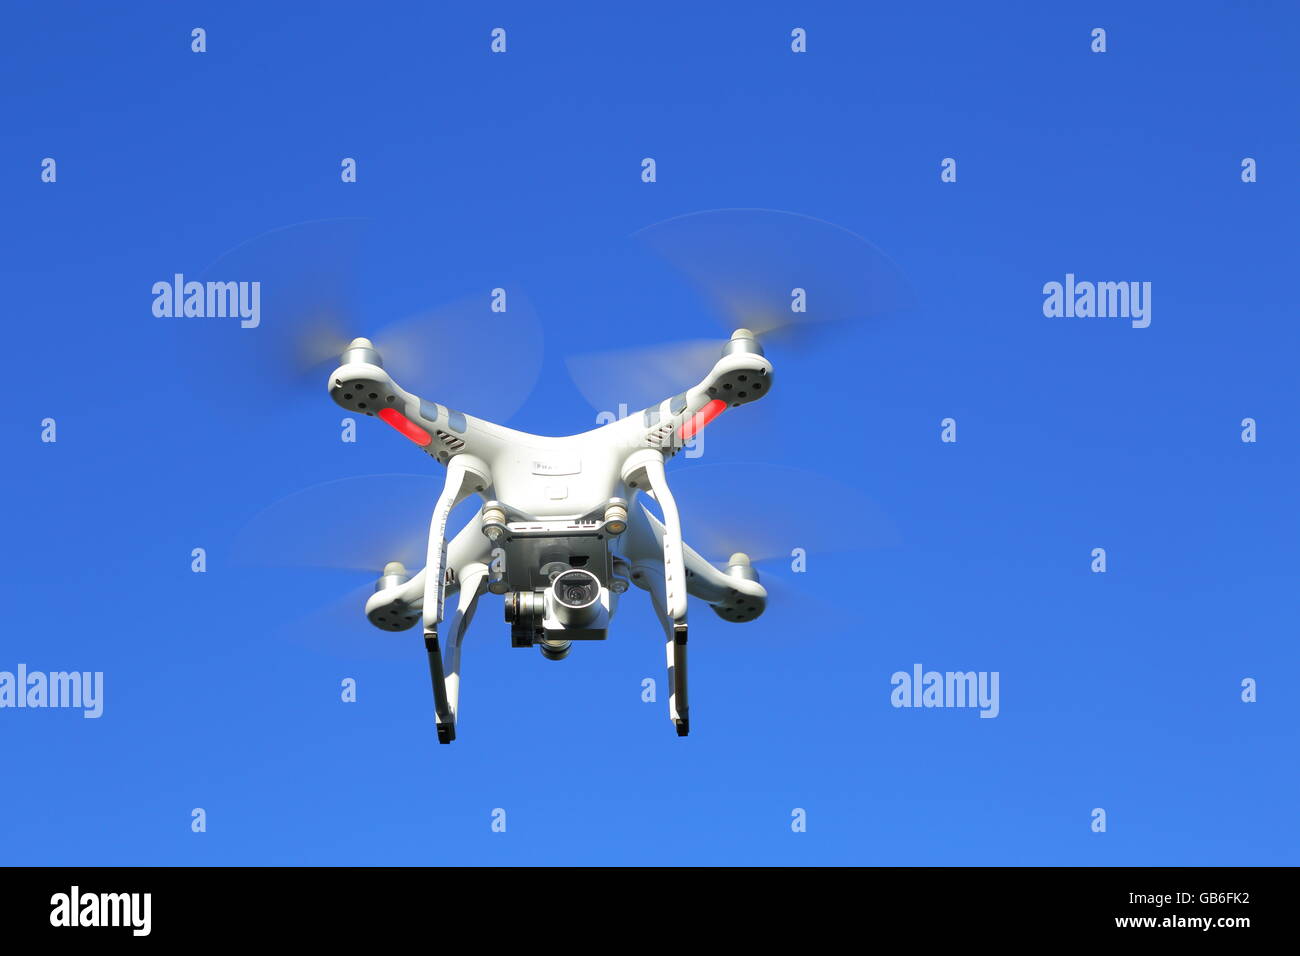 A drone, or UAV, or quadcopter, in flight under a vivid blue sky. Stock Photo